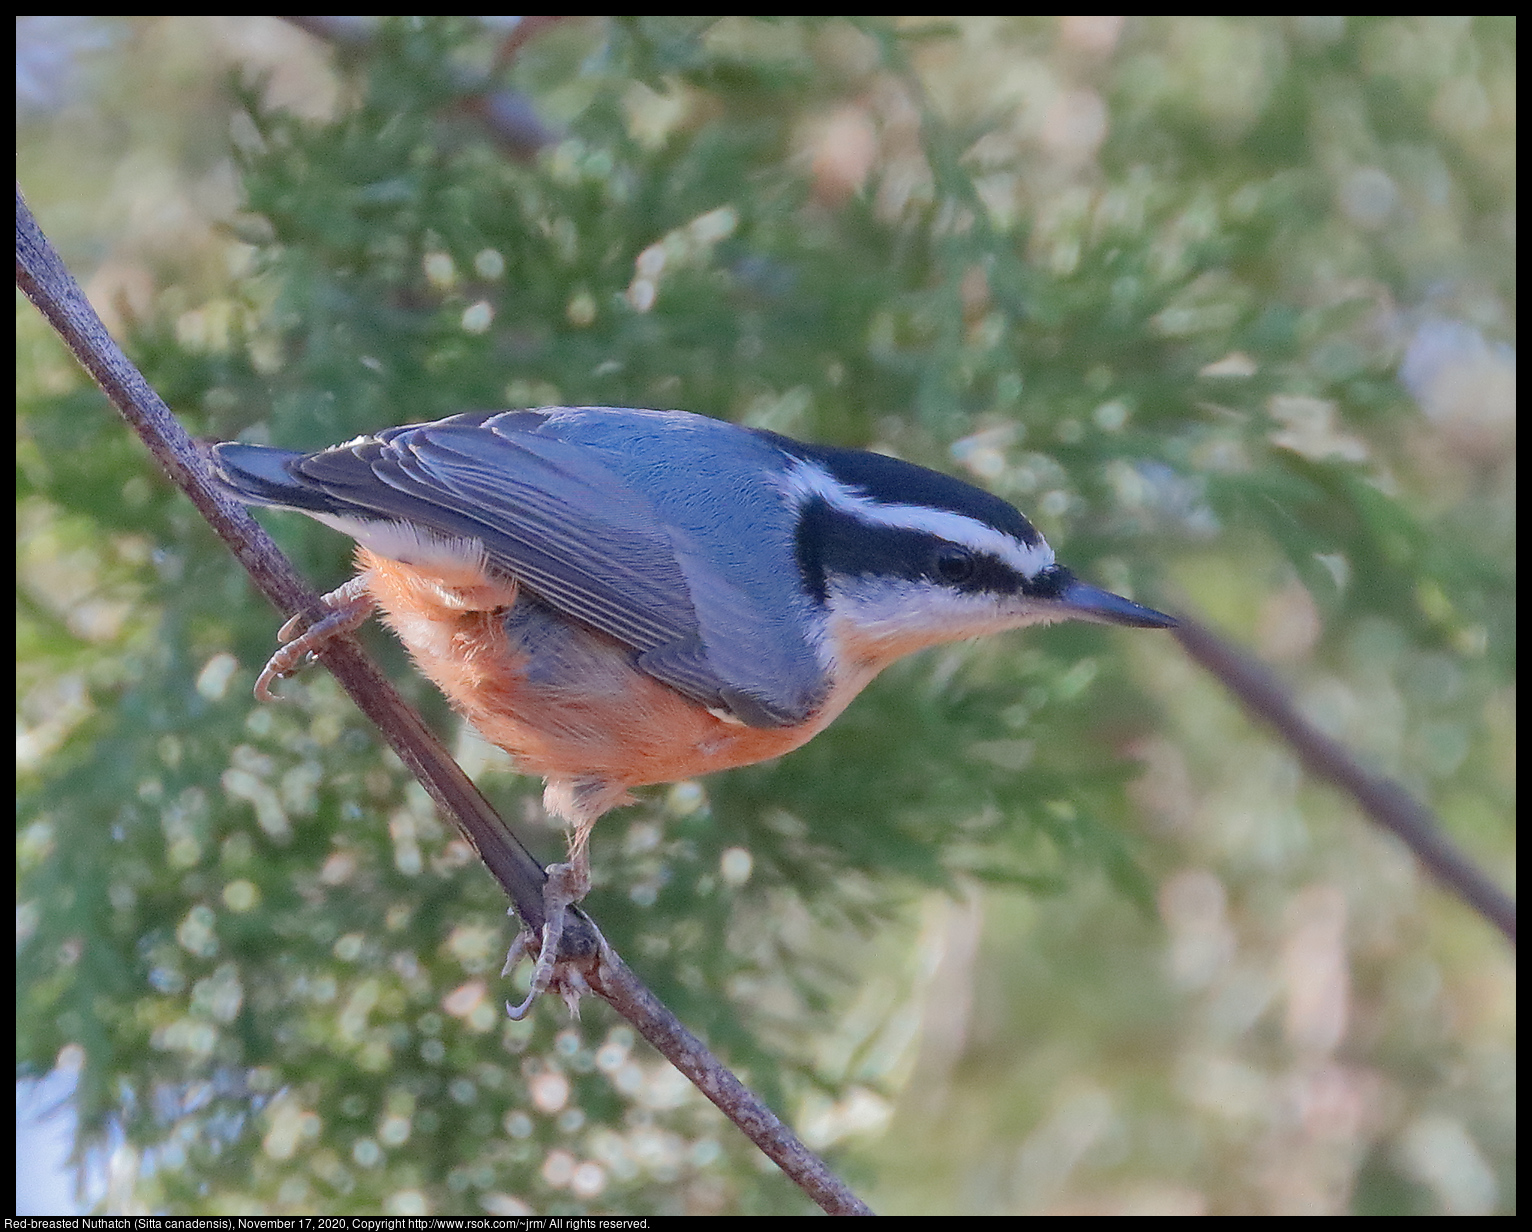 Red-breasted Nuthatch (Sitta canadensis), November 17, 2020